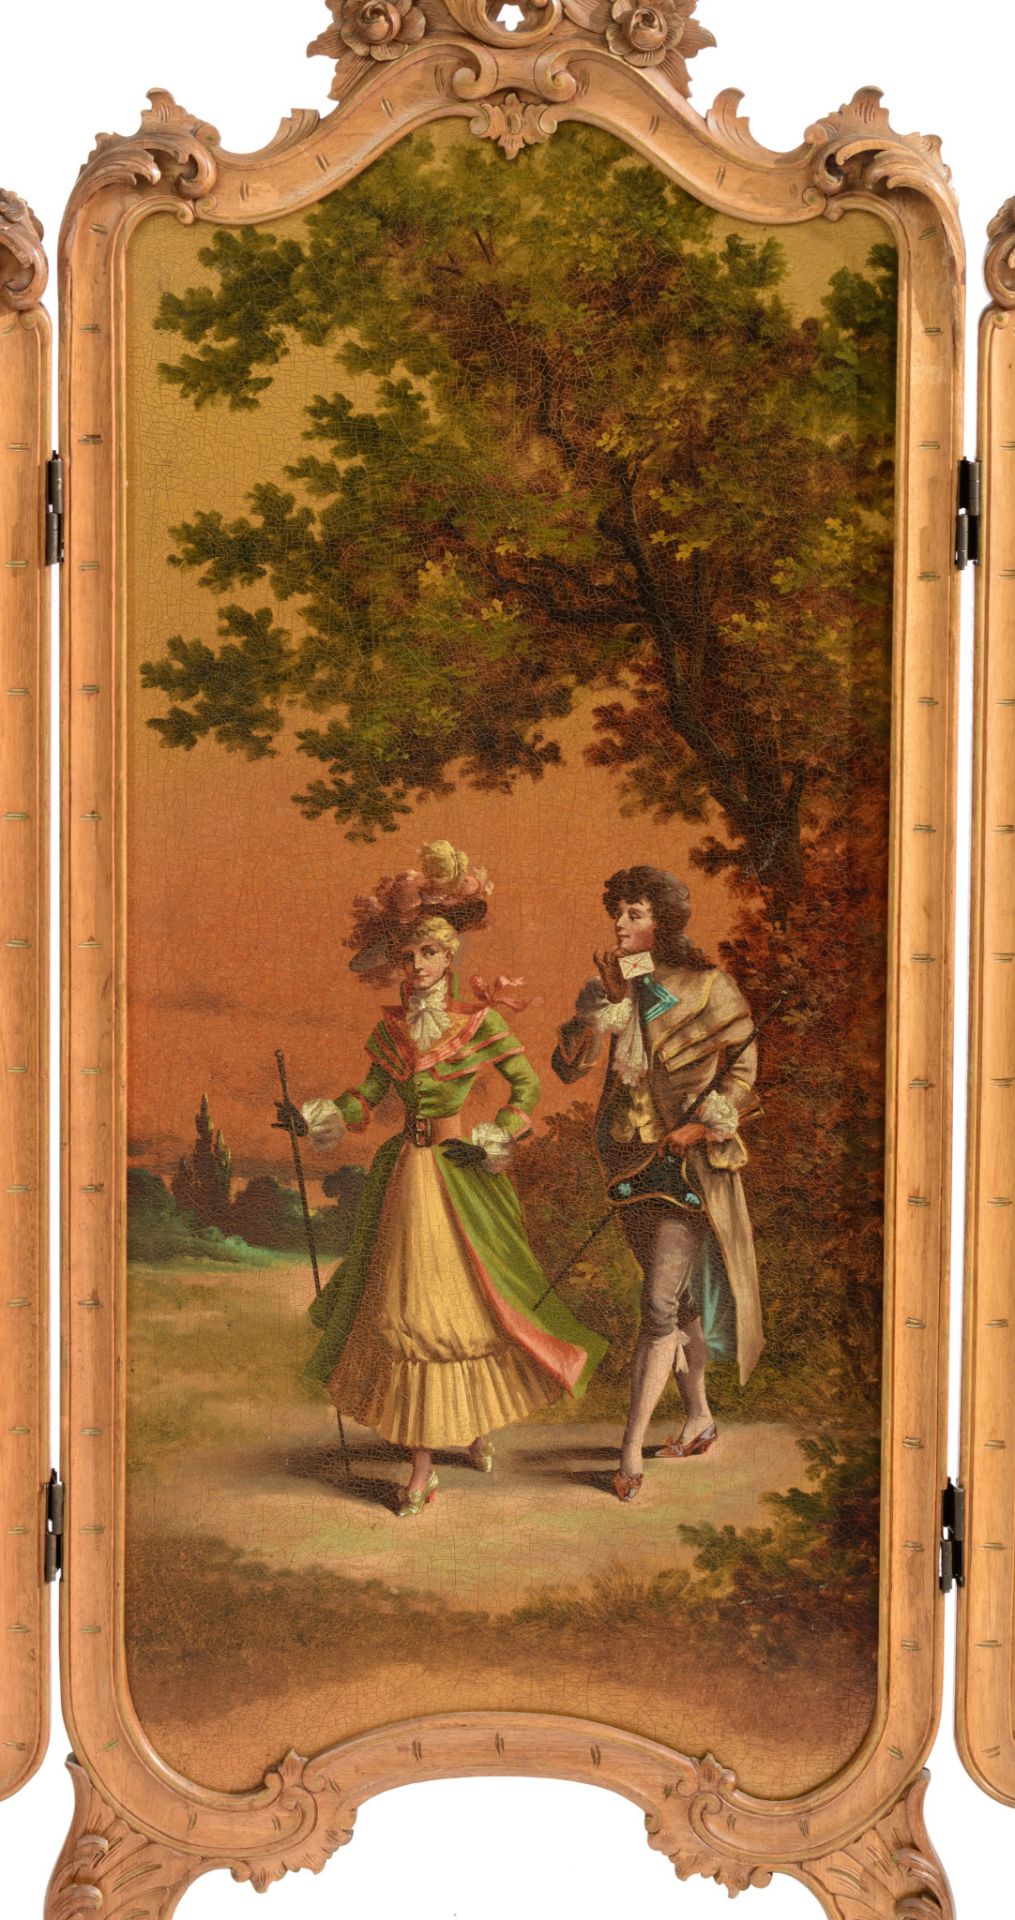 A Rococo style fire screen, with a romantic scene in the 'Vernis Martin' manner, H 148 - W 52 - 106 - Image 3 of 7